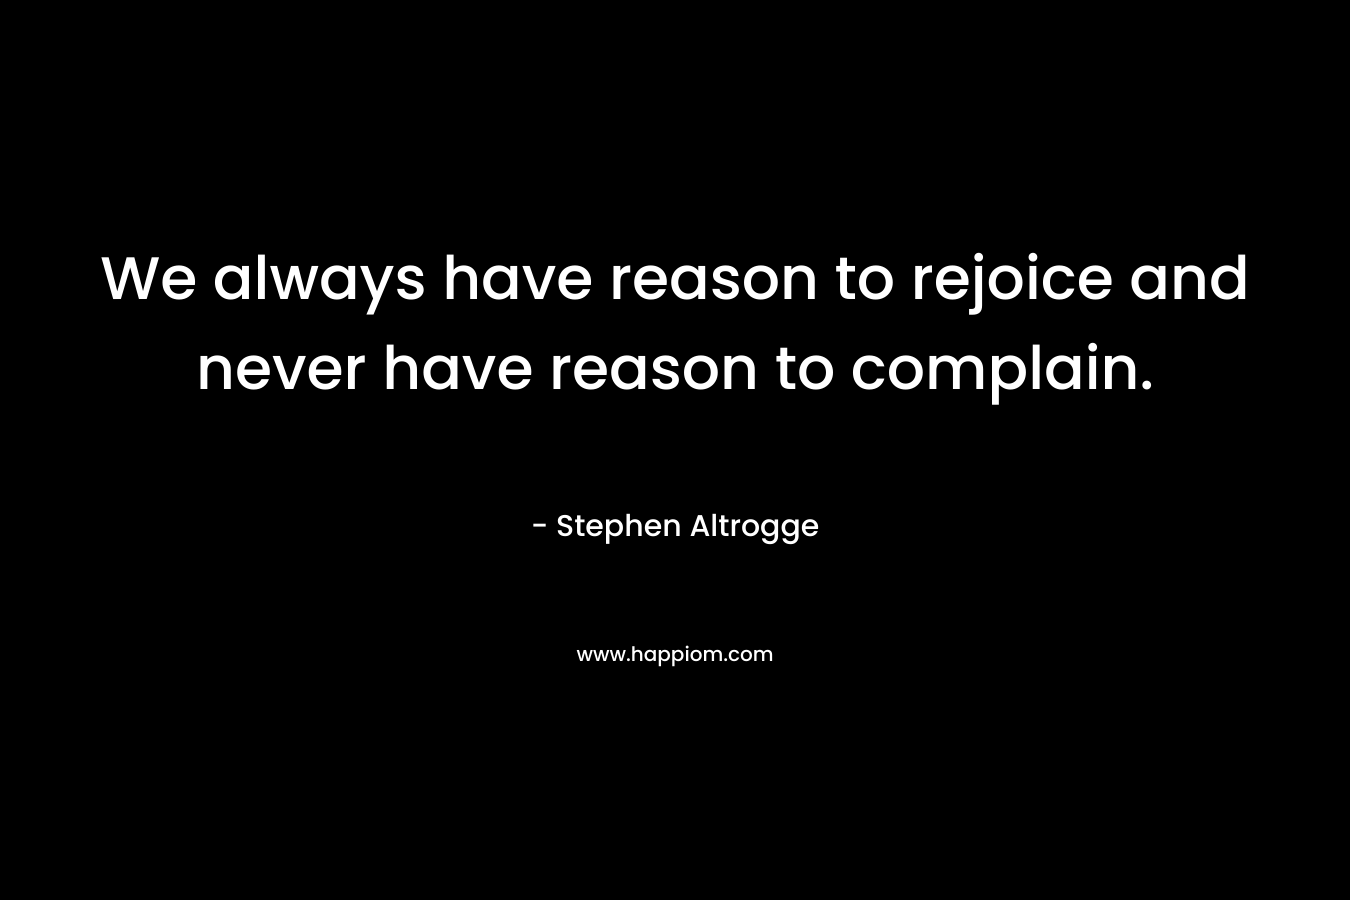 We always have reason to rejoice and never have reason to complain. – Stephen Altrogge